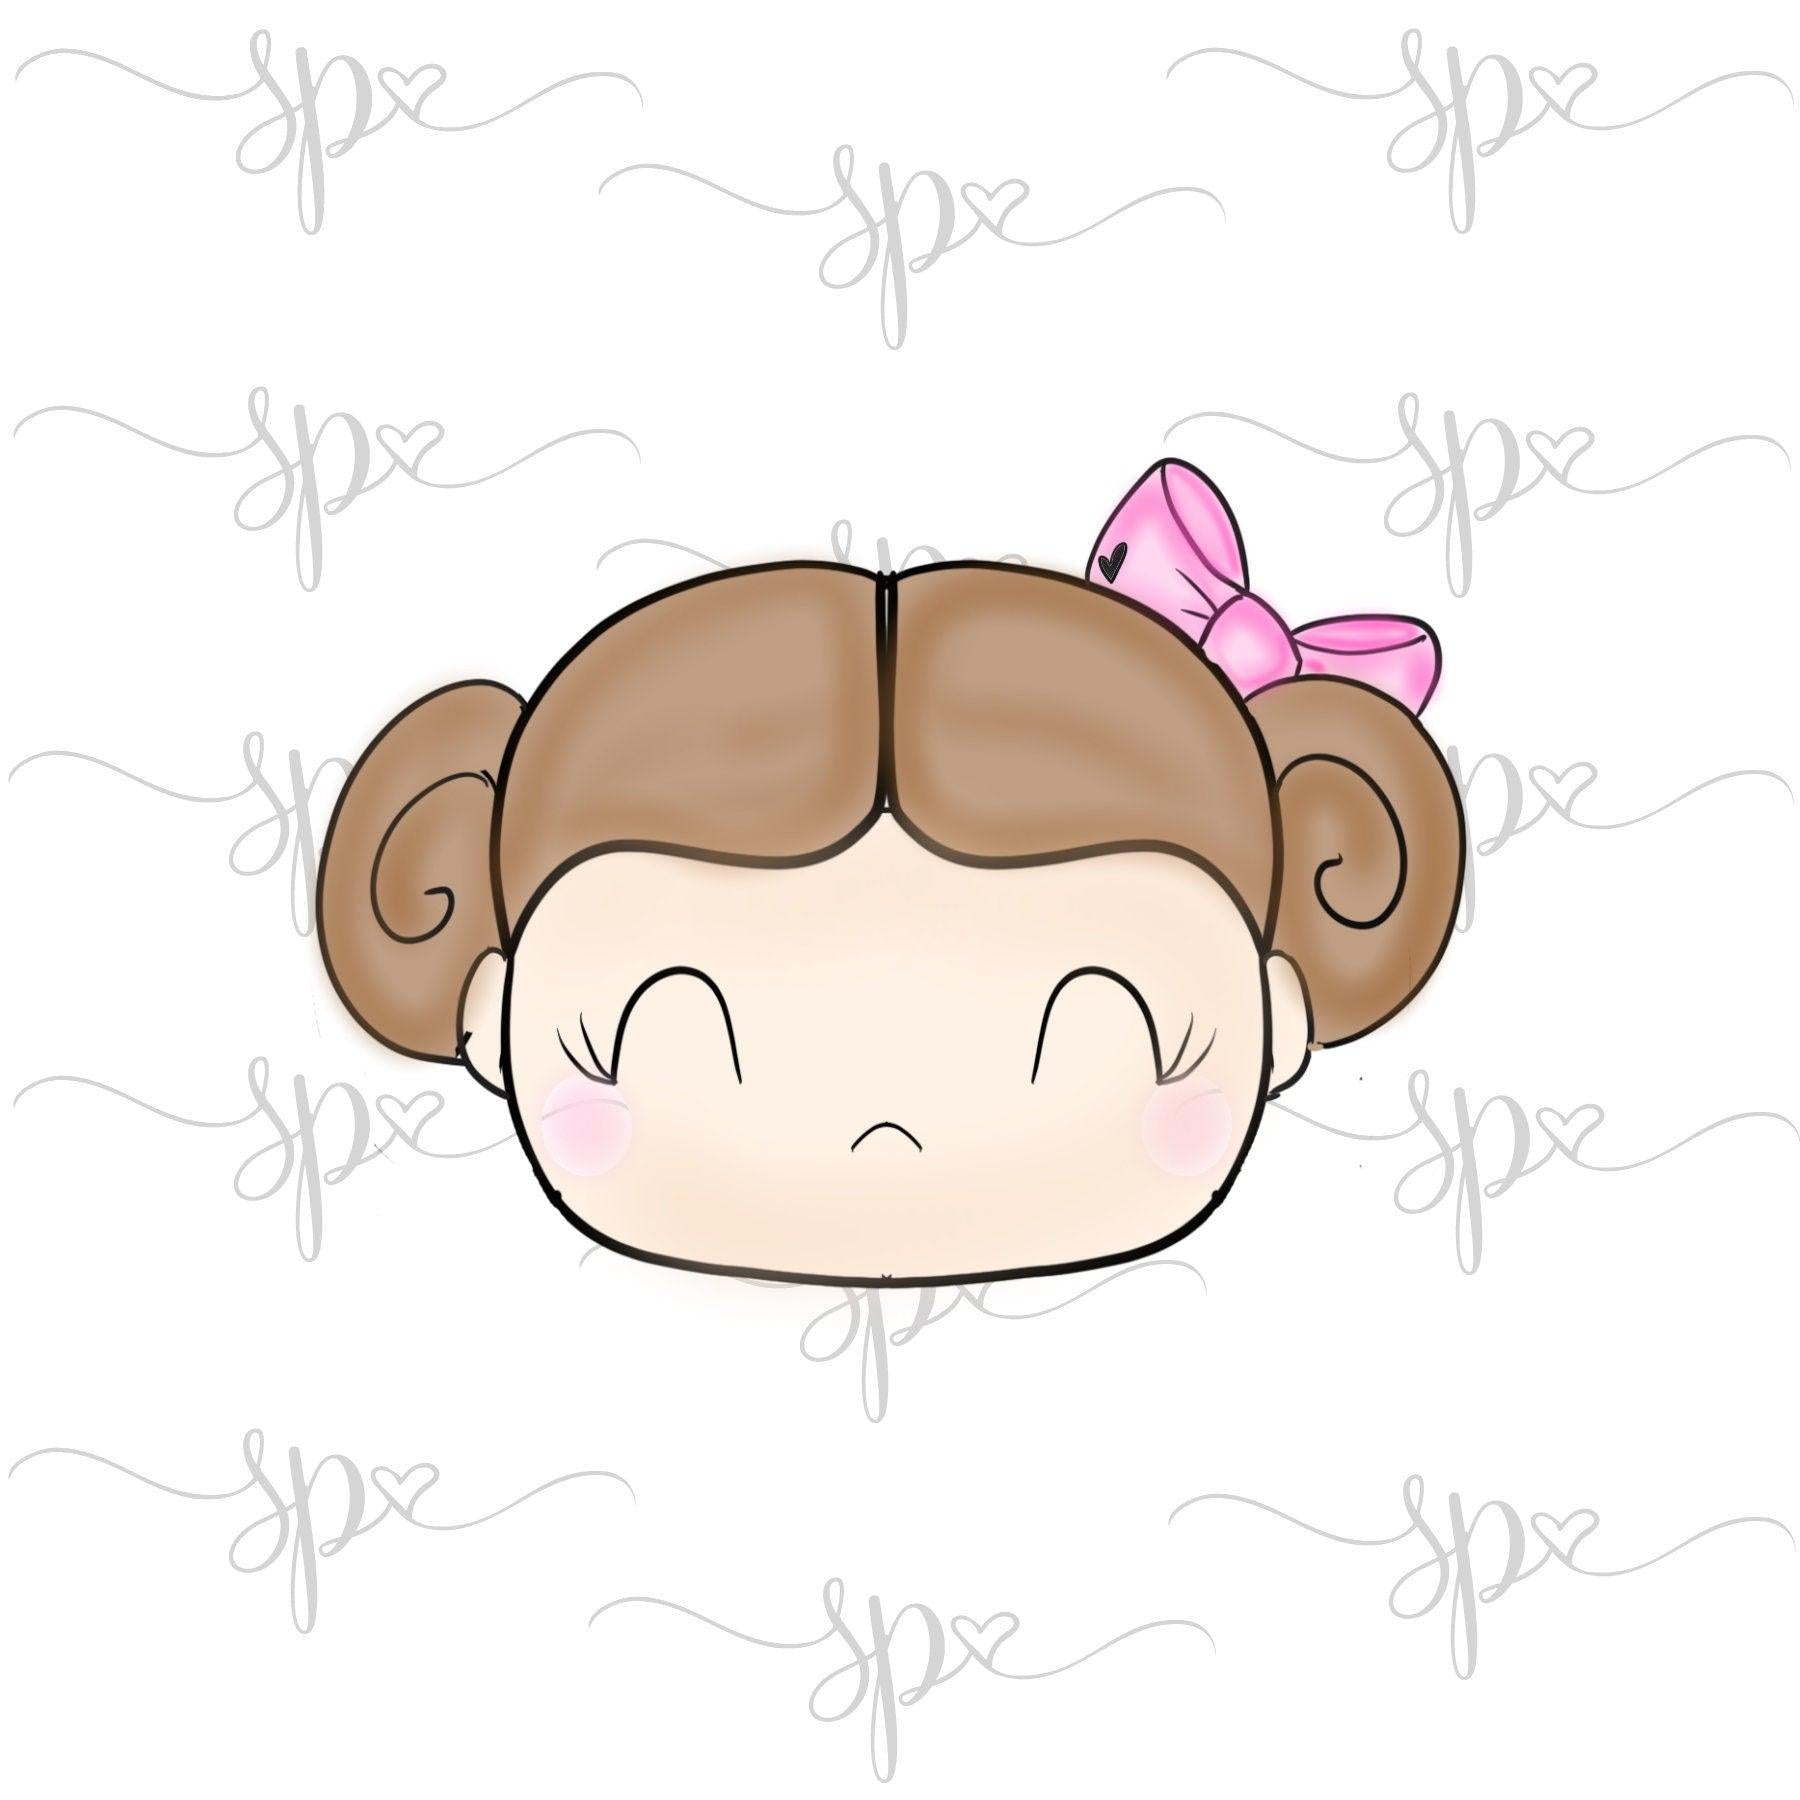 Girly Galaxy Princess Face Cookie Cutter - Sweetleigh 